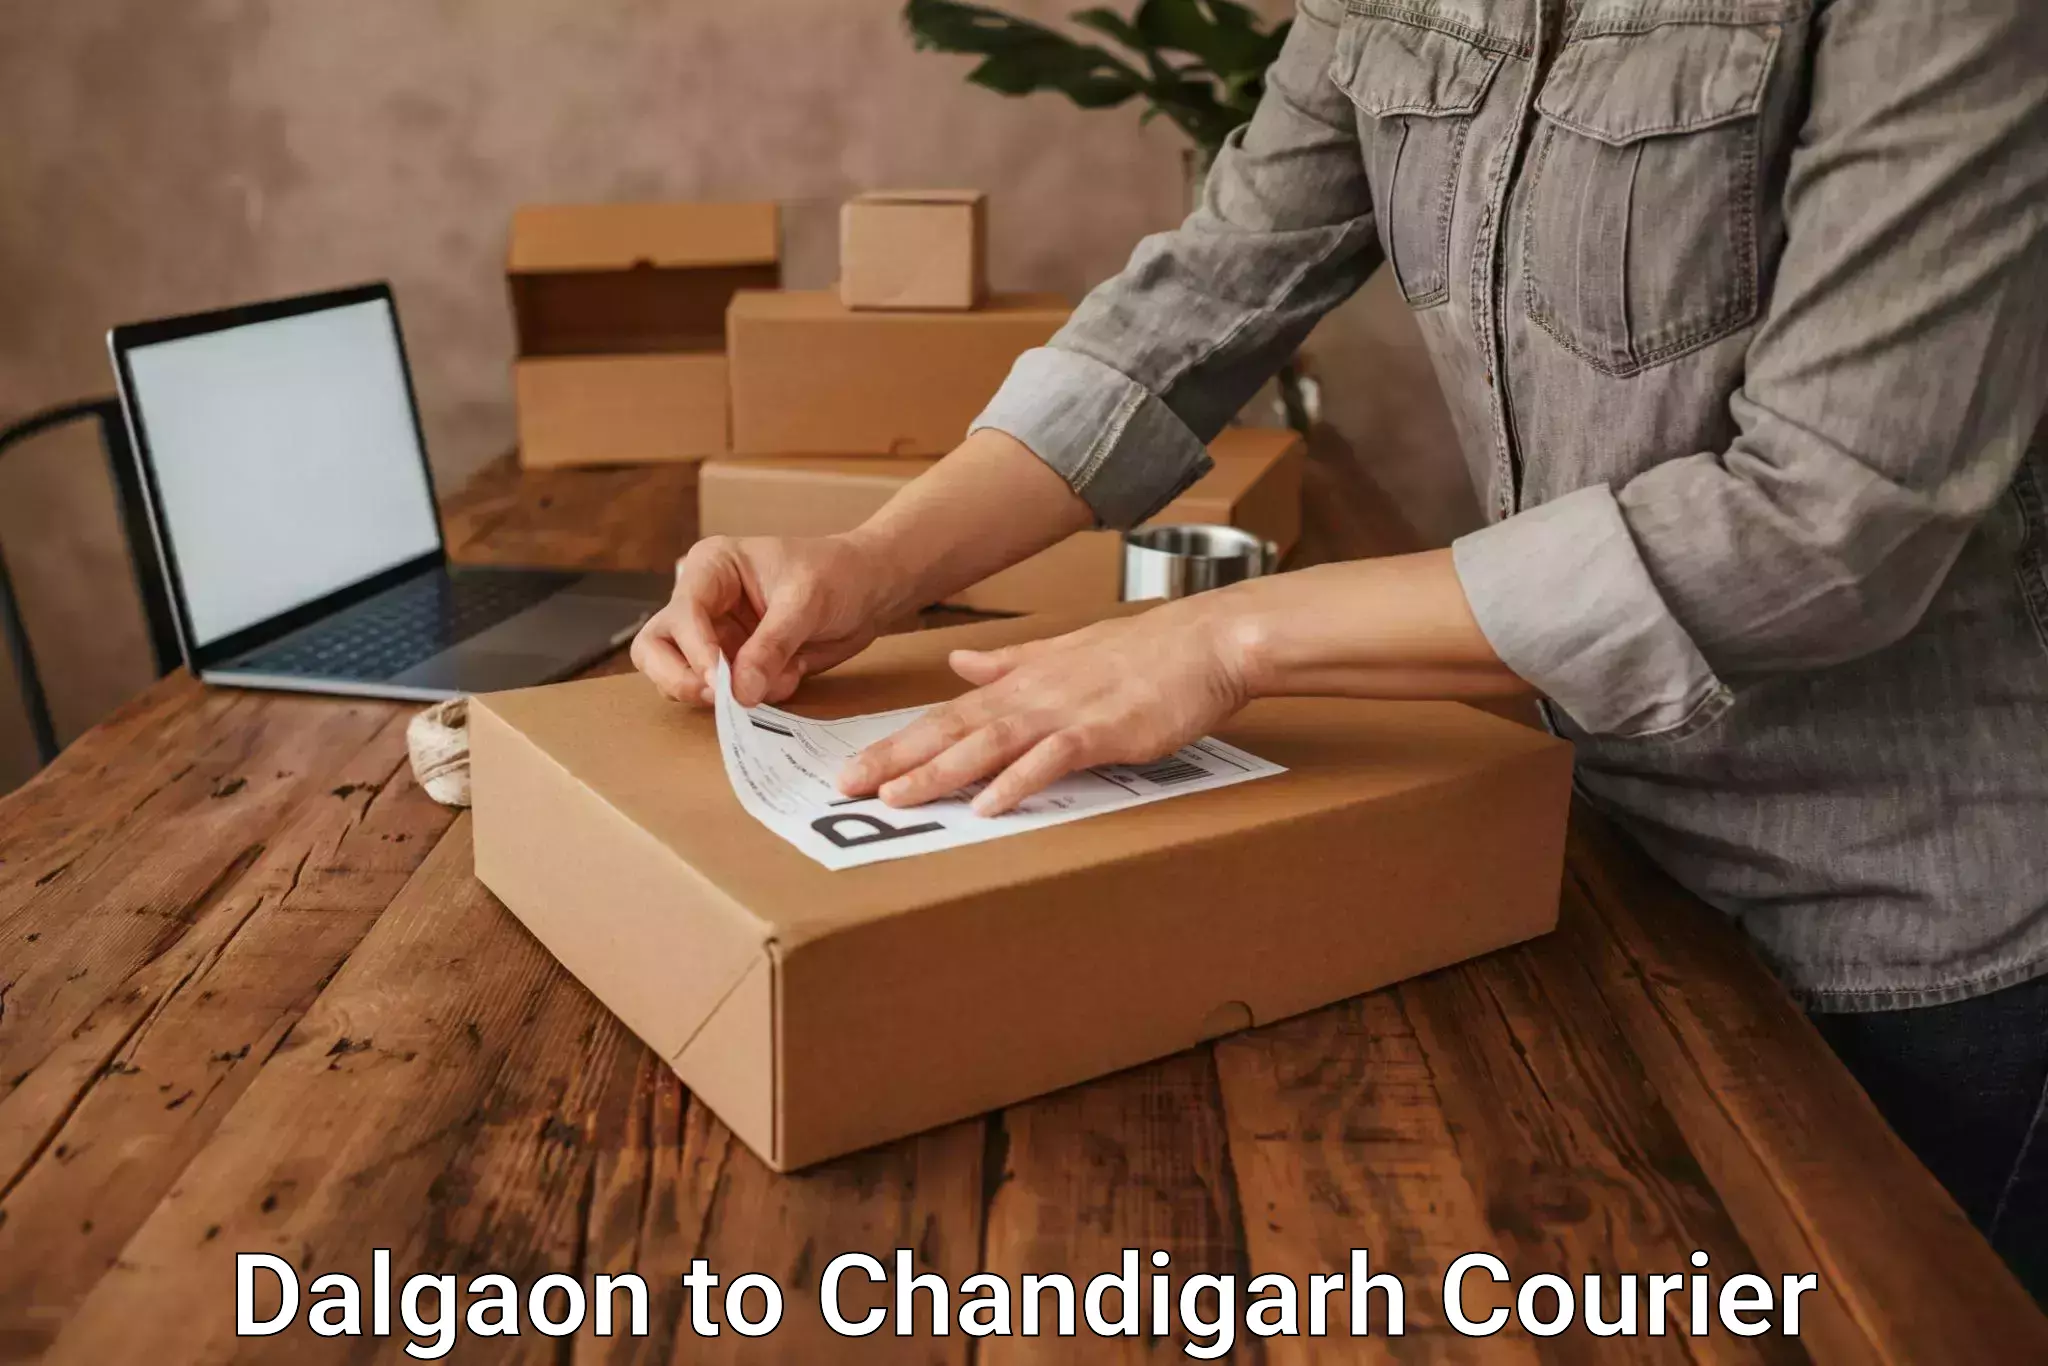 Cash on delivery service Dalgaon to Chandigarh